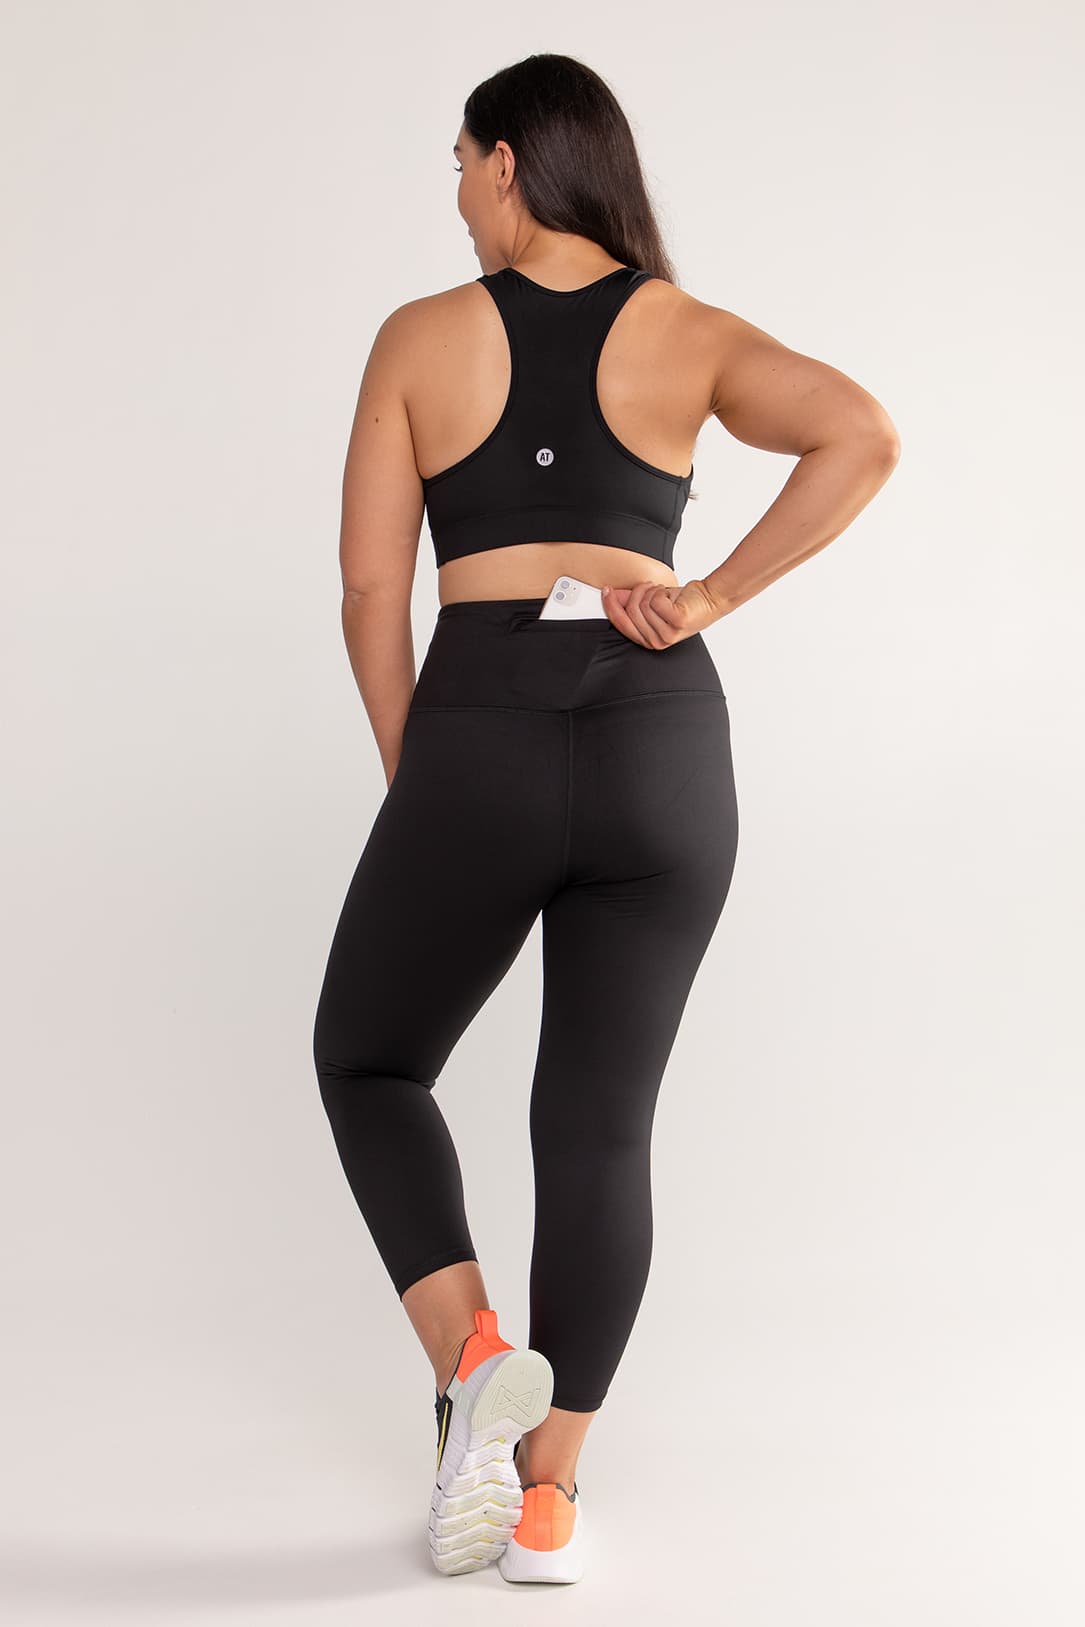 Romper, $70 at ryderwear.com.au - Wheretoget | Workout clothes, Casual  sportswear, Gym suit